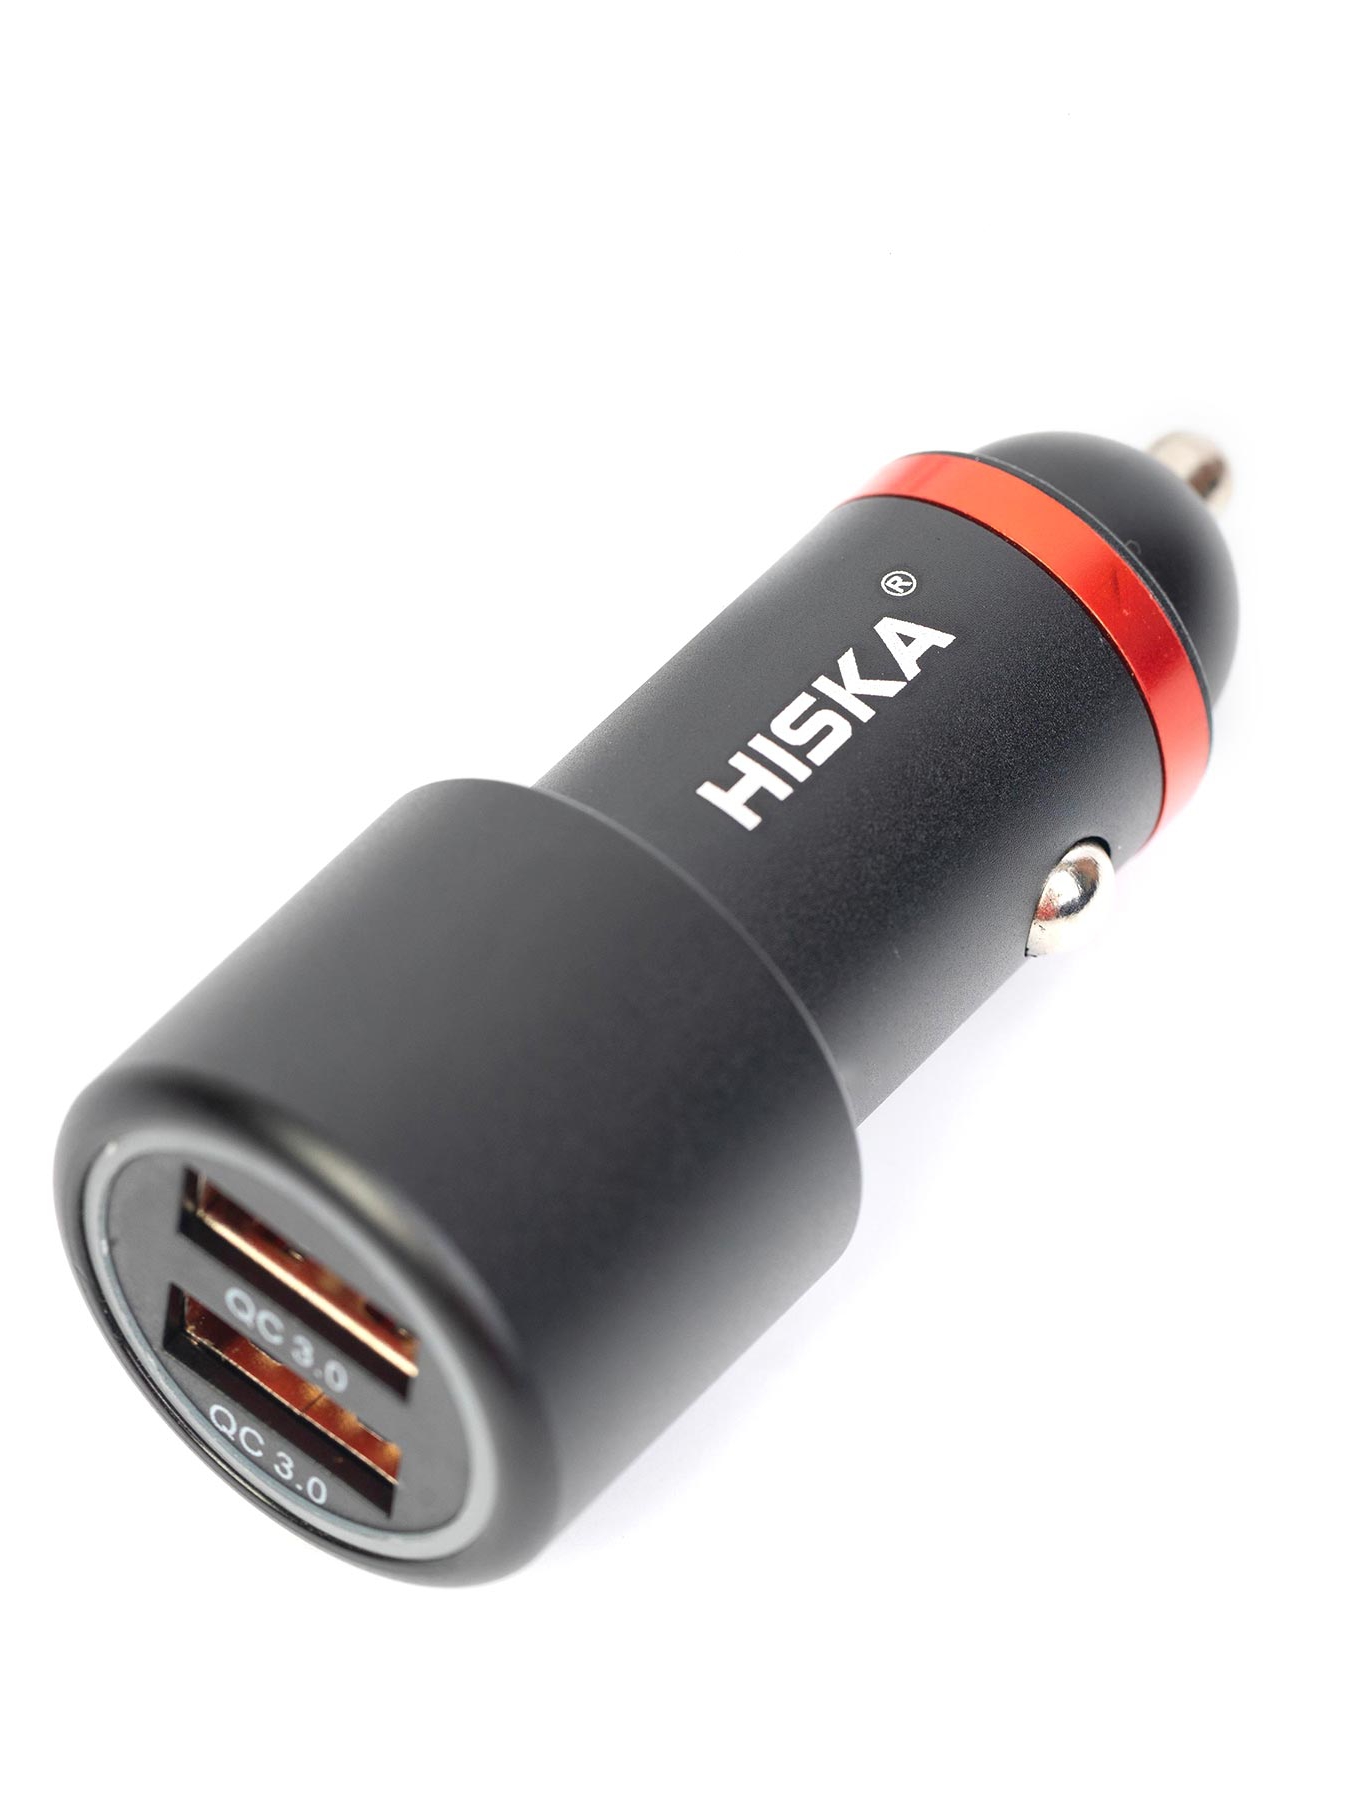 Car cigarette lighter charging C307 chargers